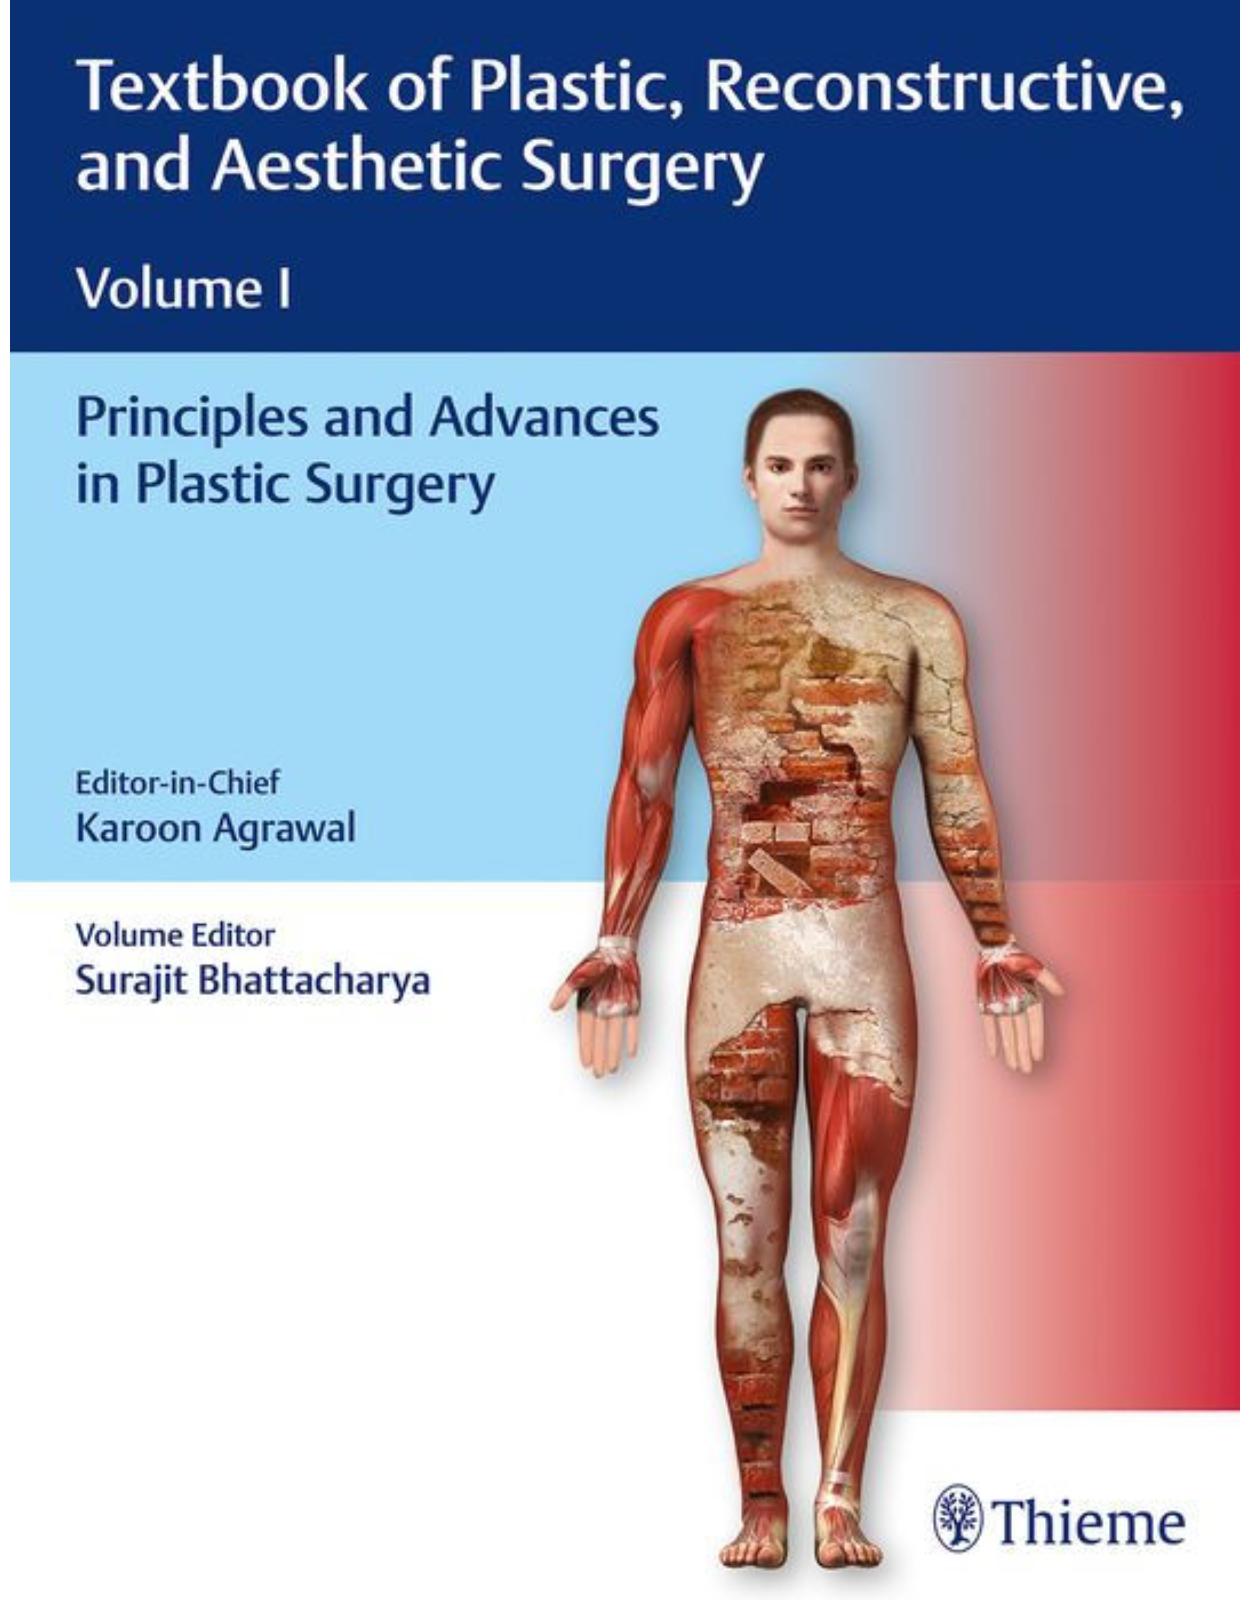 Textbook of Plastic, Reconstructive and Aesthetic Surgery (Vol. 1): Principles and Advances in Plastic Surgery 